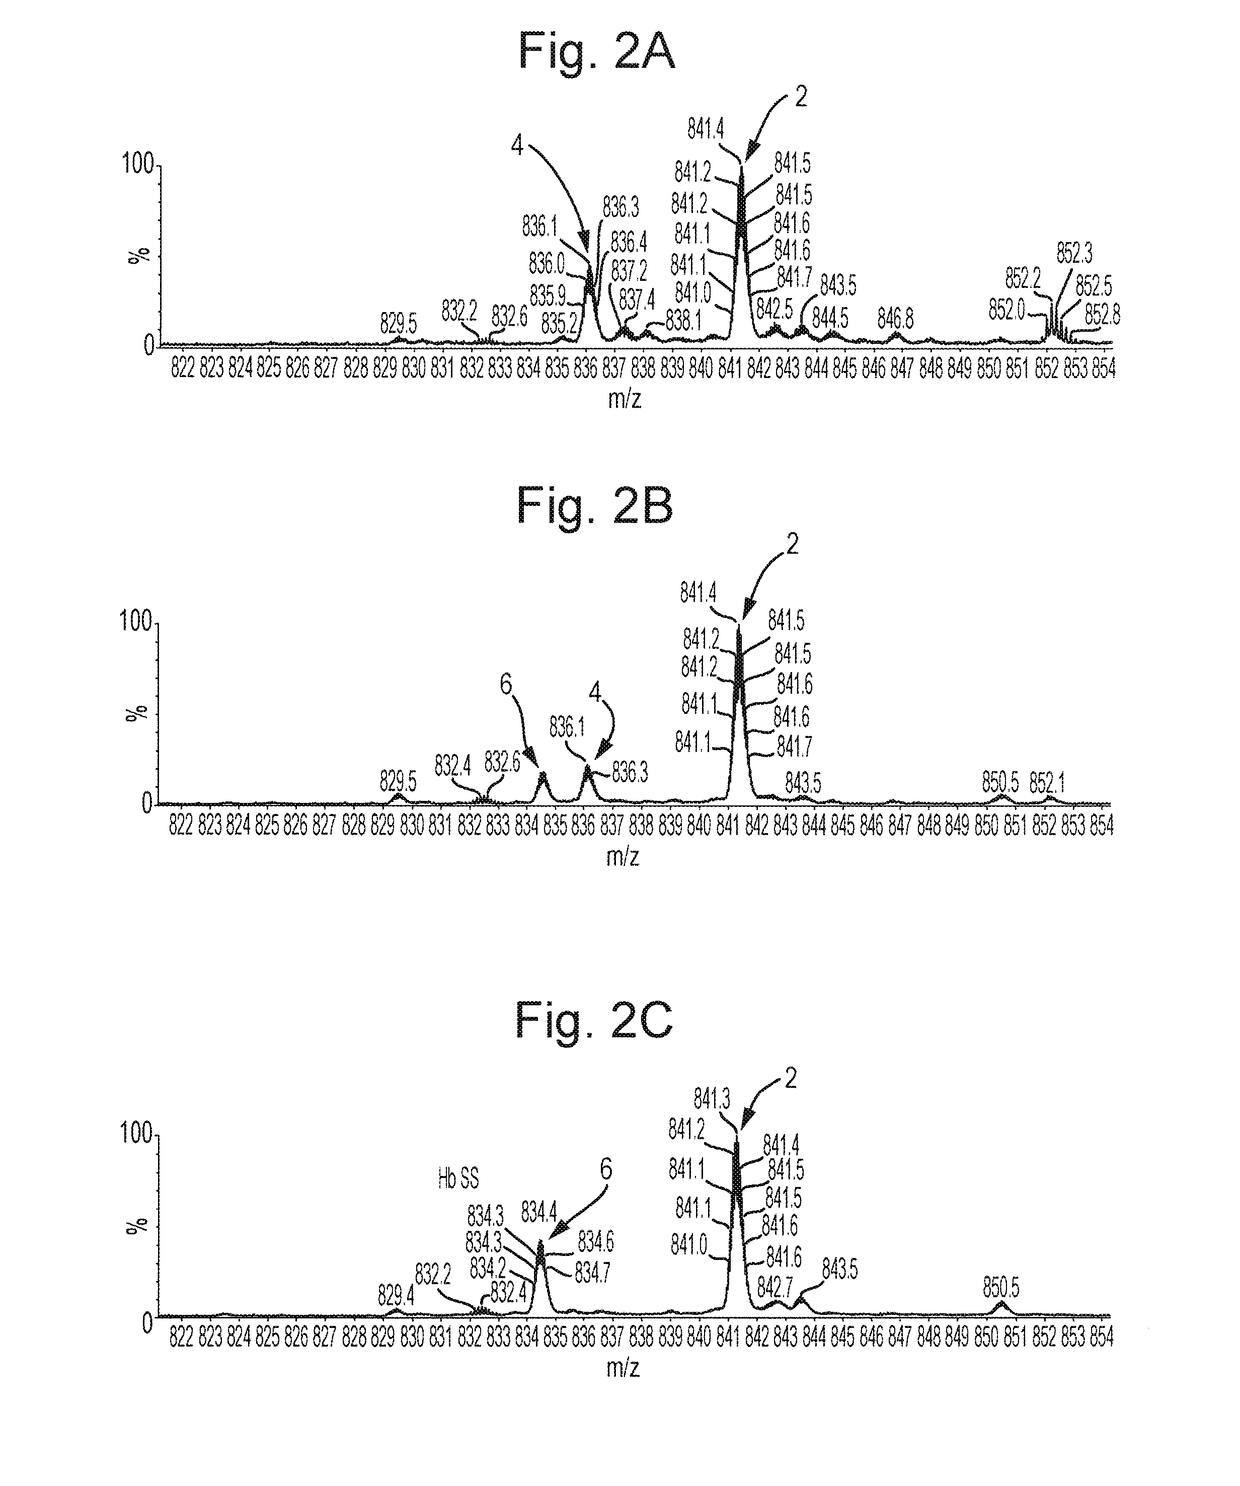 Mass Spectrometry for Determining if a Mutated Variant of a Target Protein is Present in a Sample